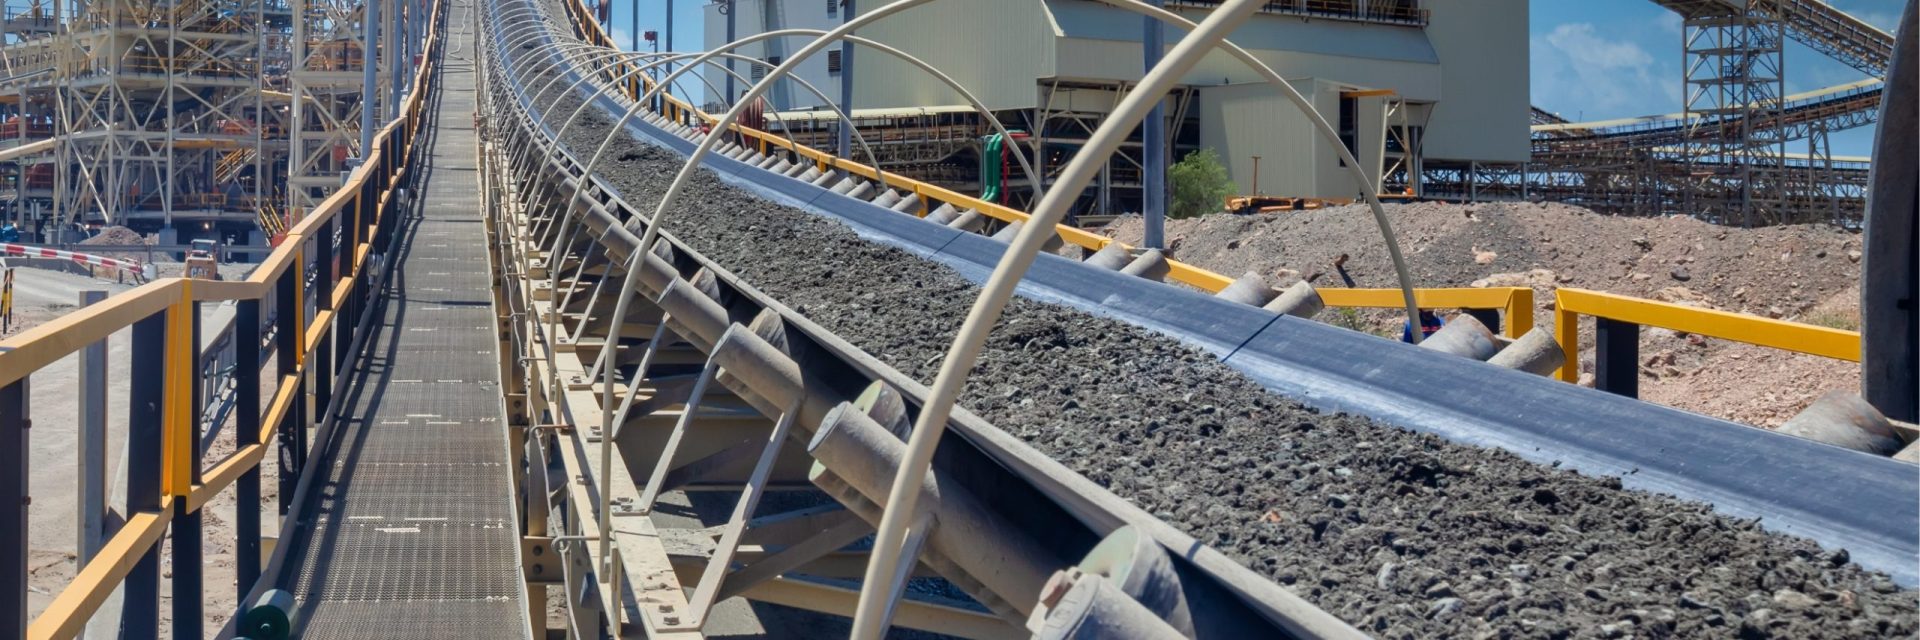 Mining and Mineral application KDV Flow Australia